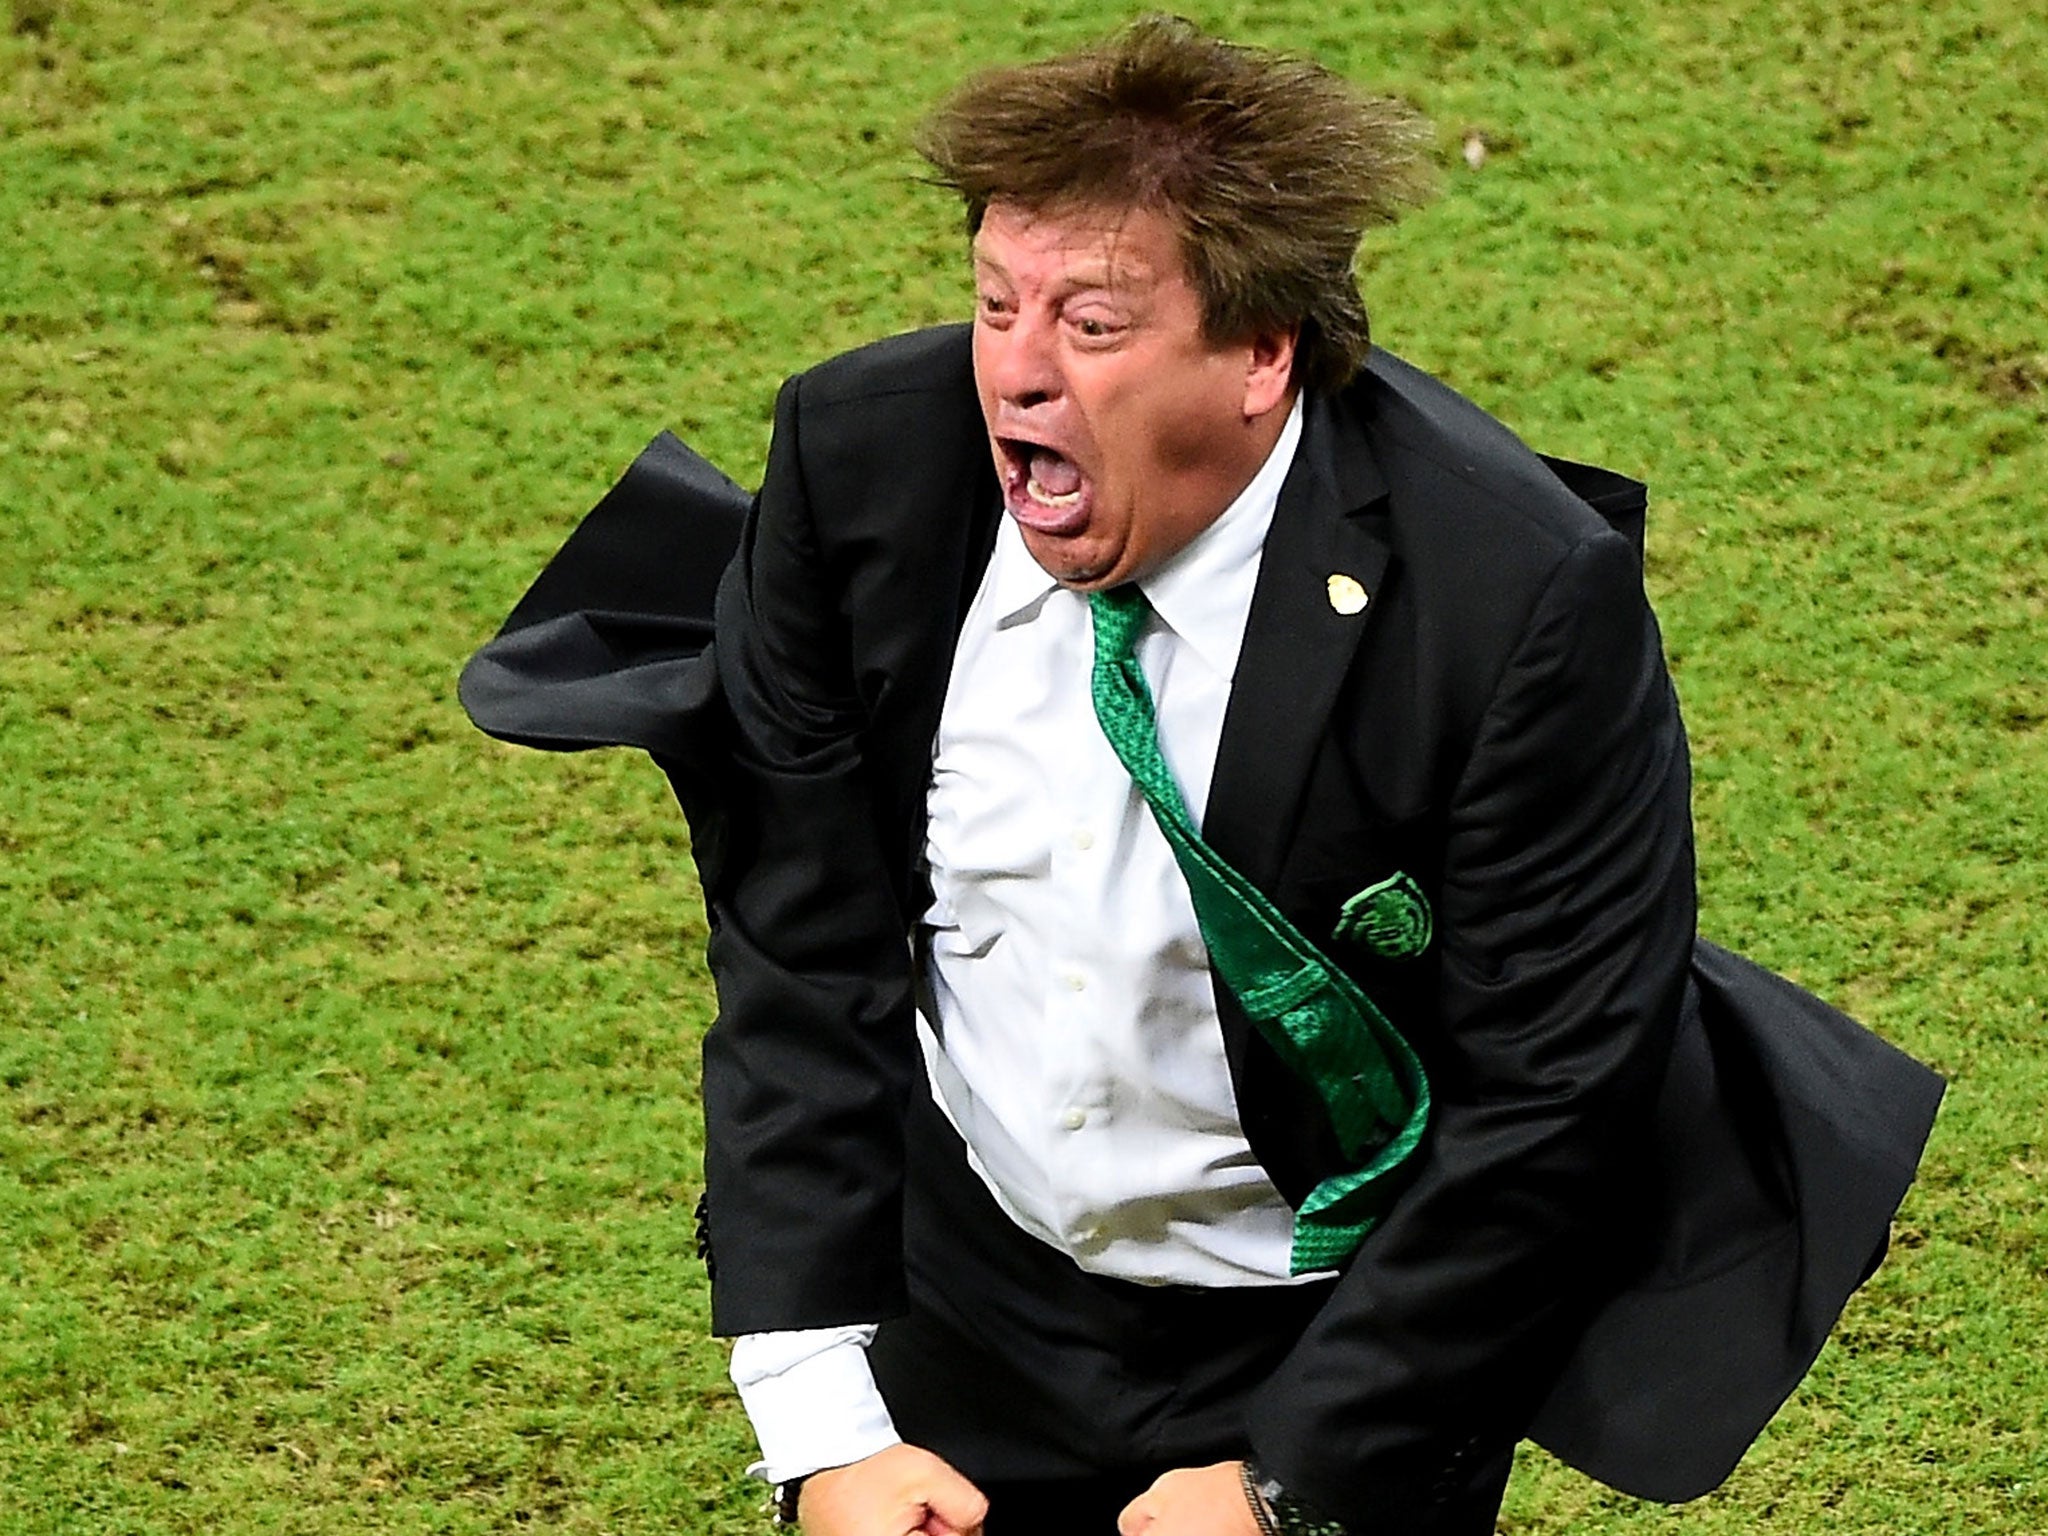 Mexico manager Miguel Herrera's no sex rule did little to help his team